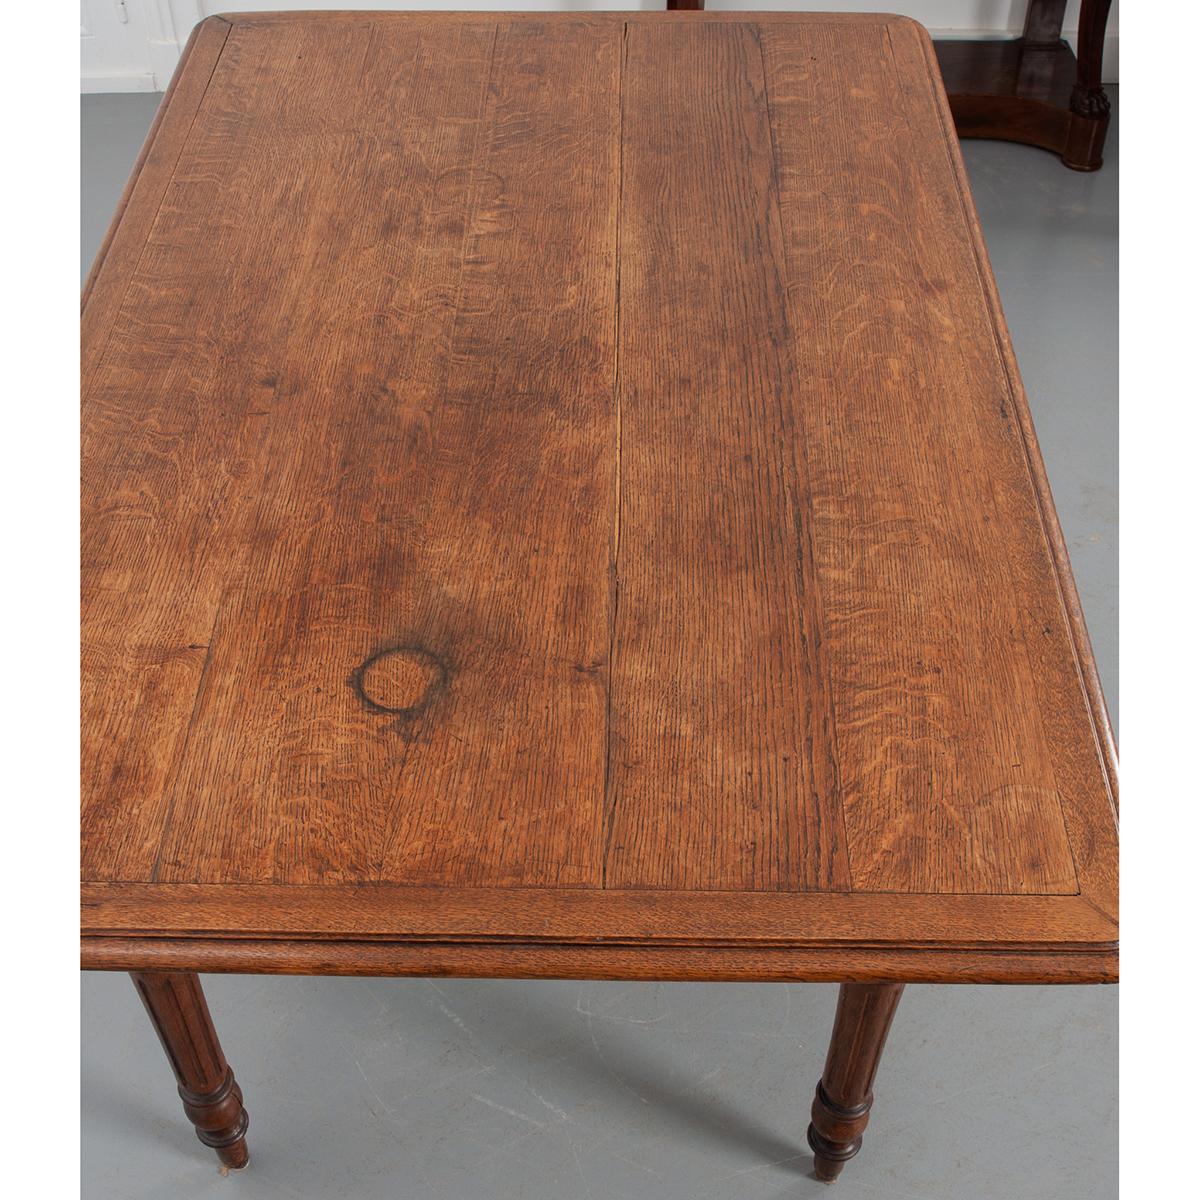 A spectacular oak farmhouse table from France, c. 1890. The table’s top consists of five boards that are framed around the edges. An exaggerated overhang is unusual for dining tables and adds a unique quality to this piece. The whole is lifted by